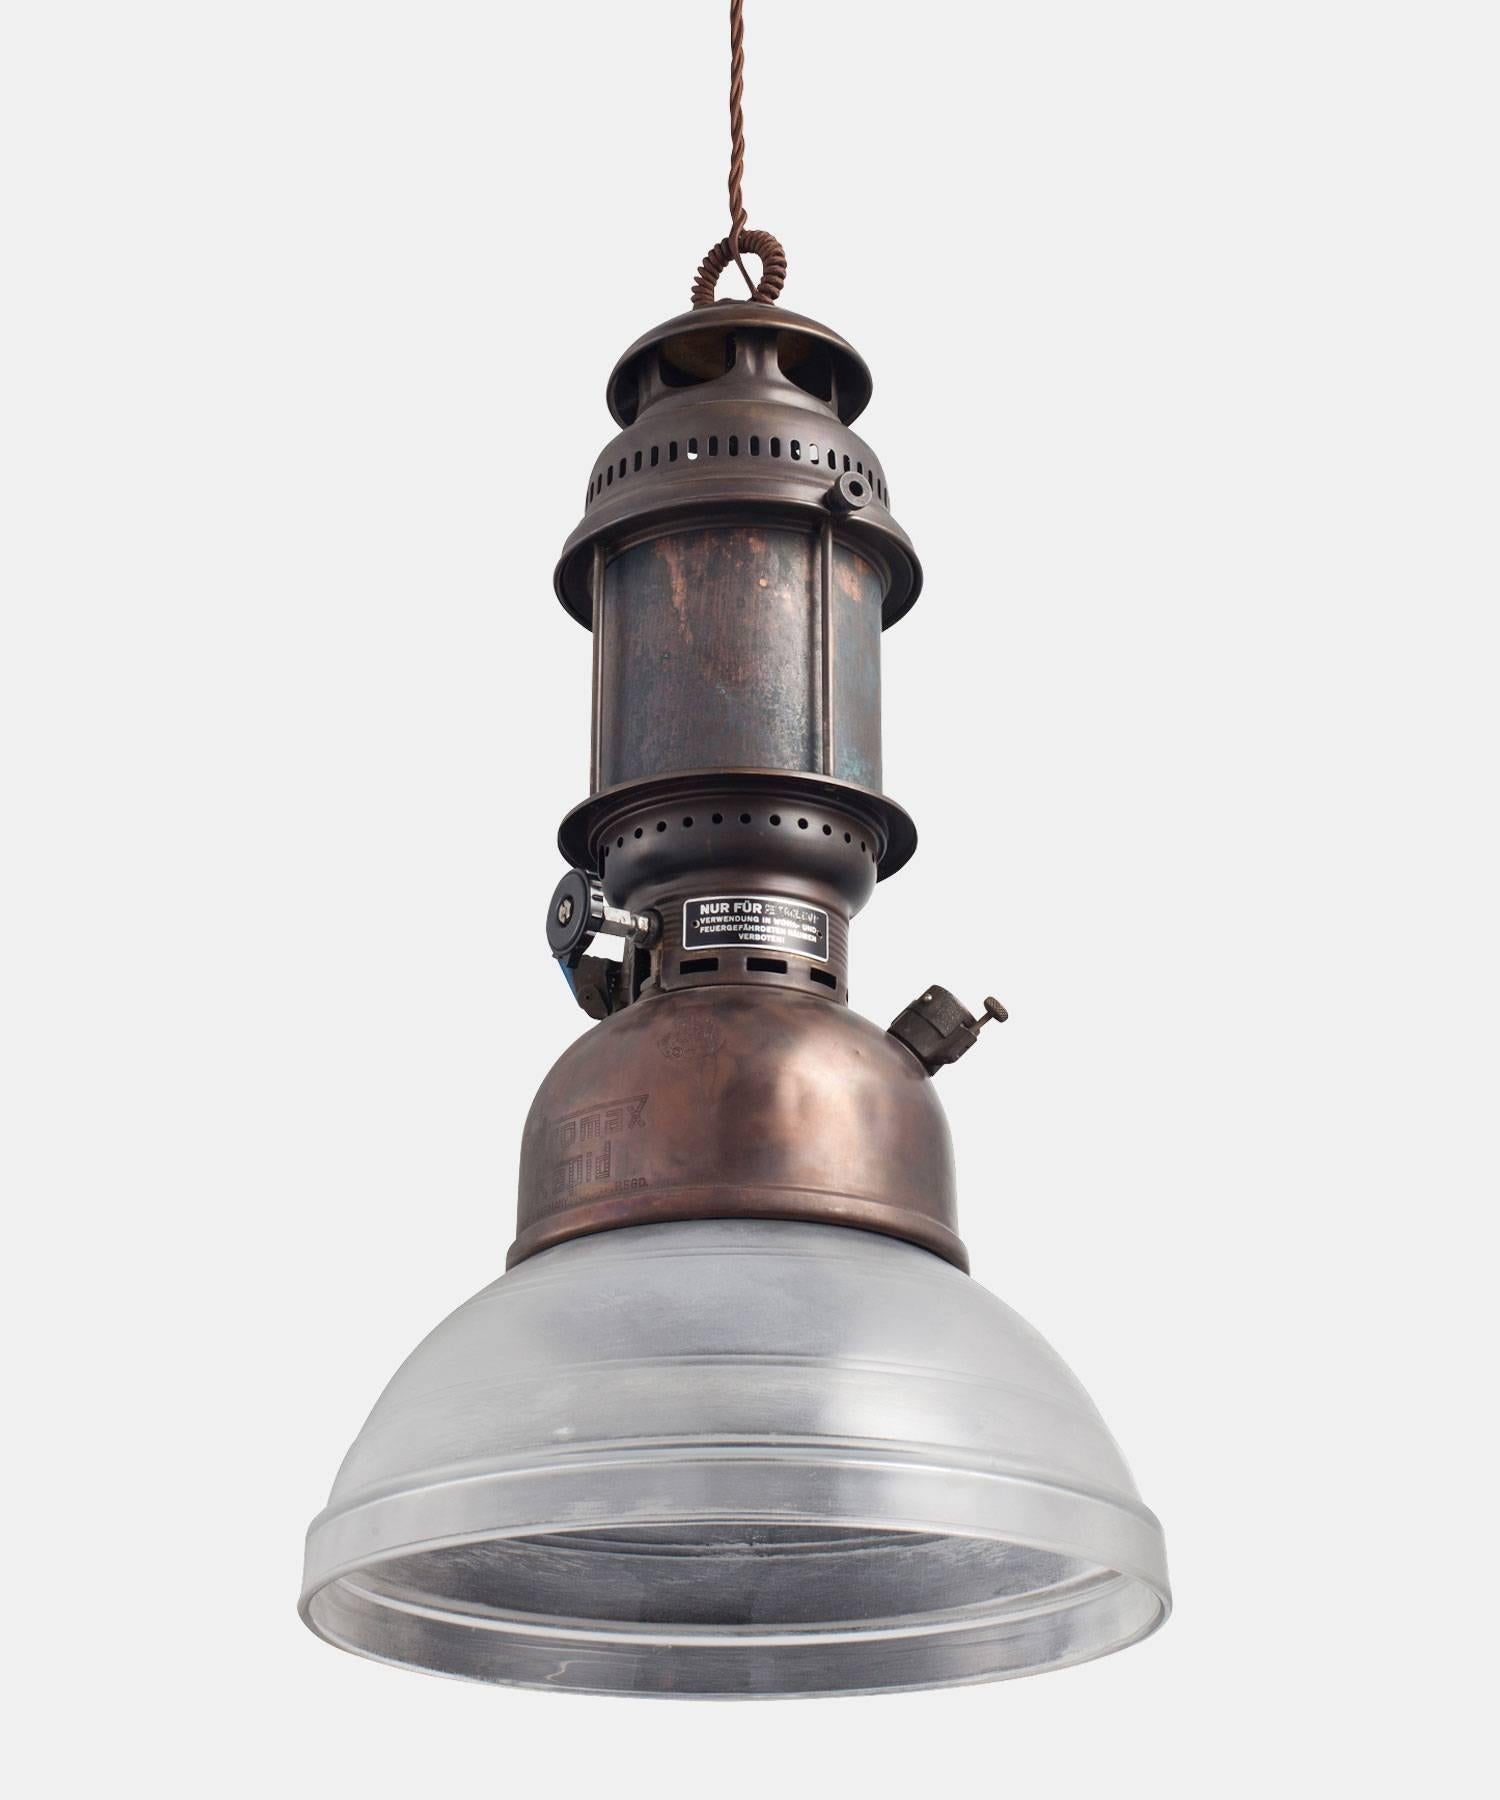 Italian Copper and Frosted Glass Industrial Pendant, 21st century